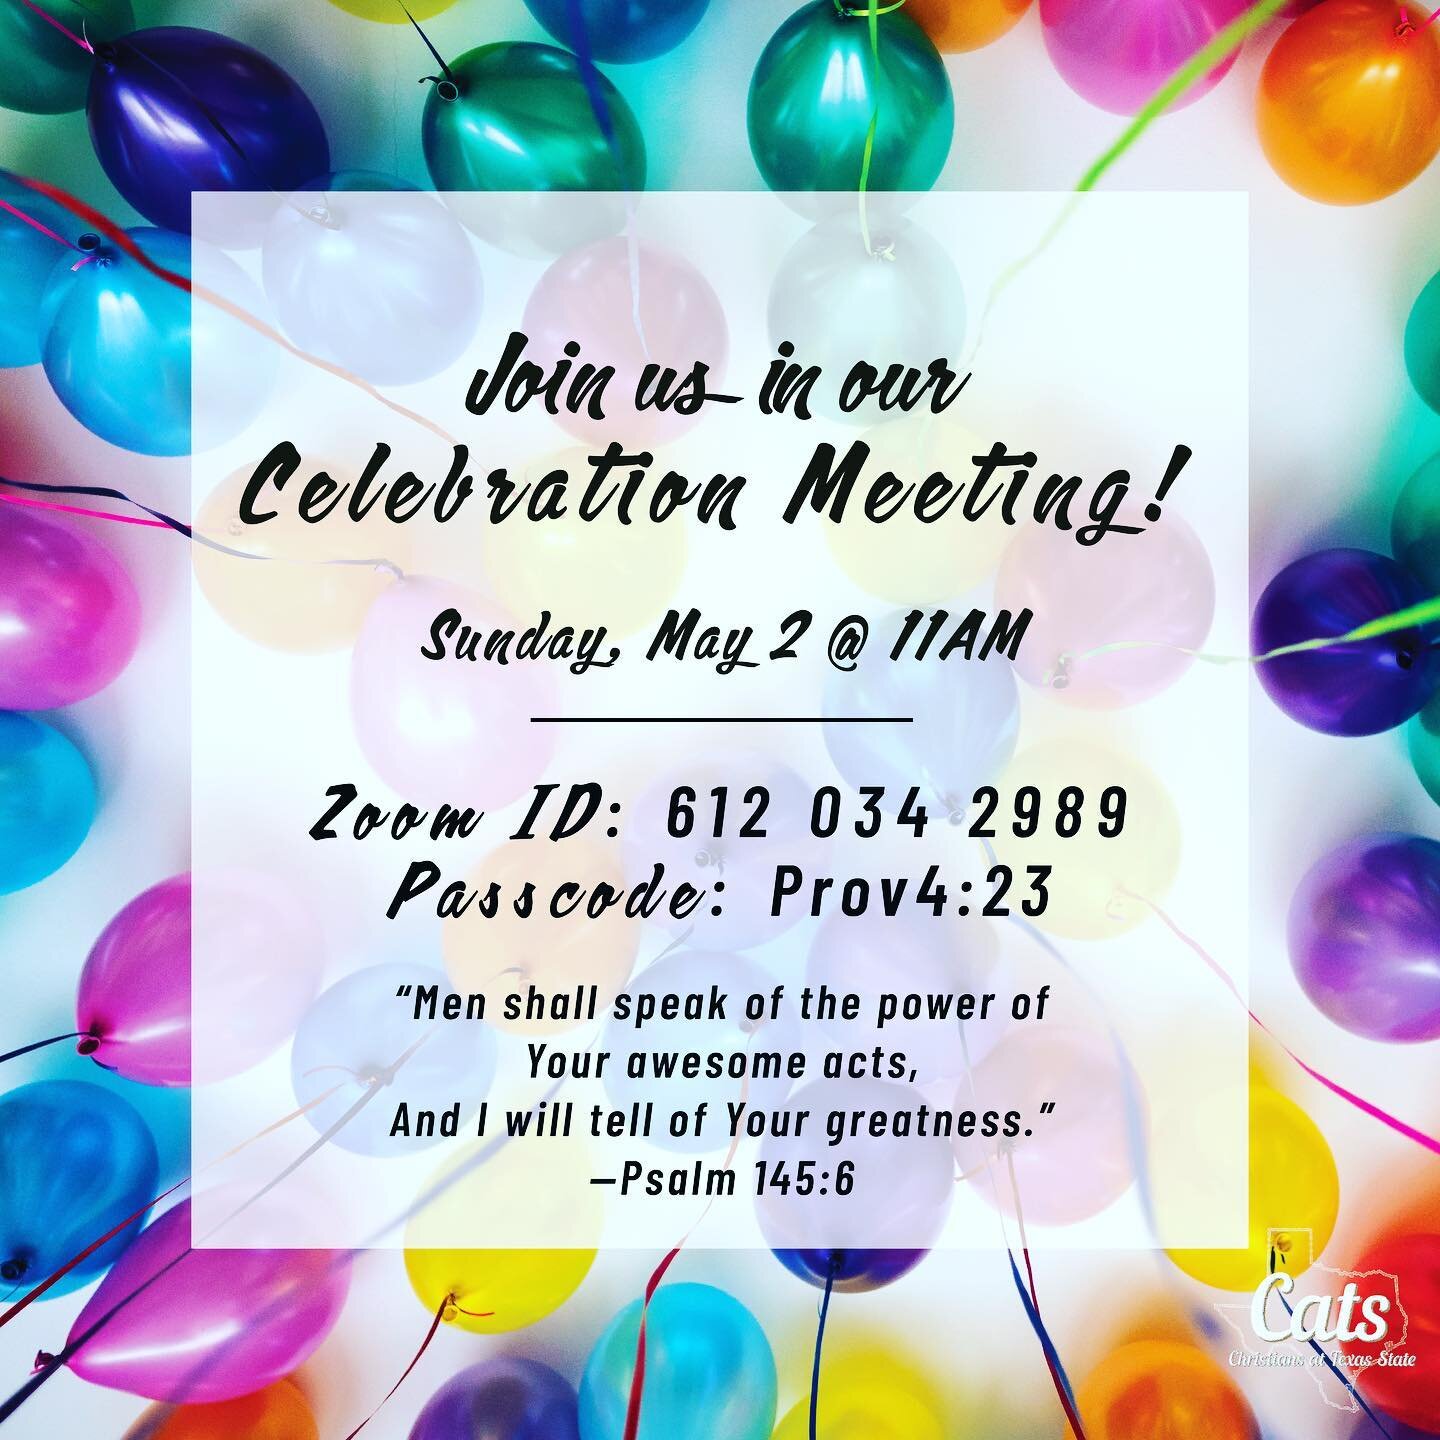 Please join us in our celebration meeting tomorrow on Zoom to share your topmost portion of your riches of Christ from the semester! #toptenpercent #celebrationmeeting #jesusislord #psalm